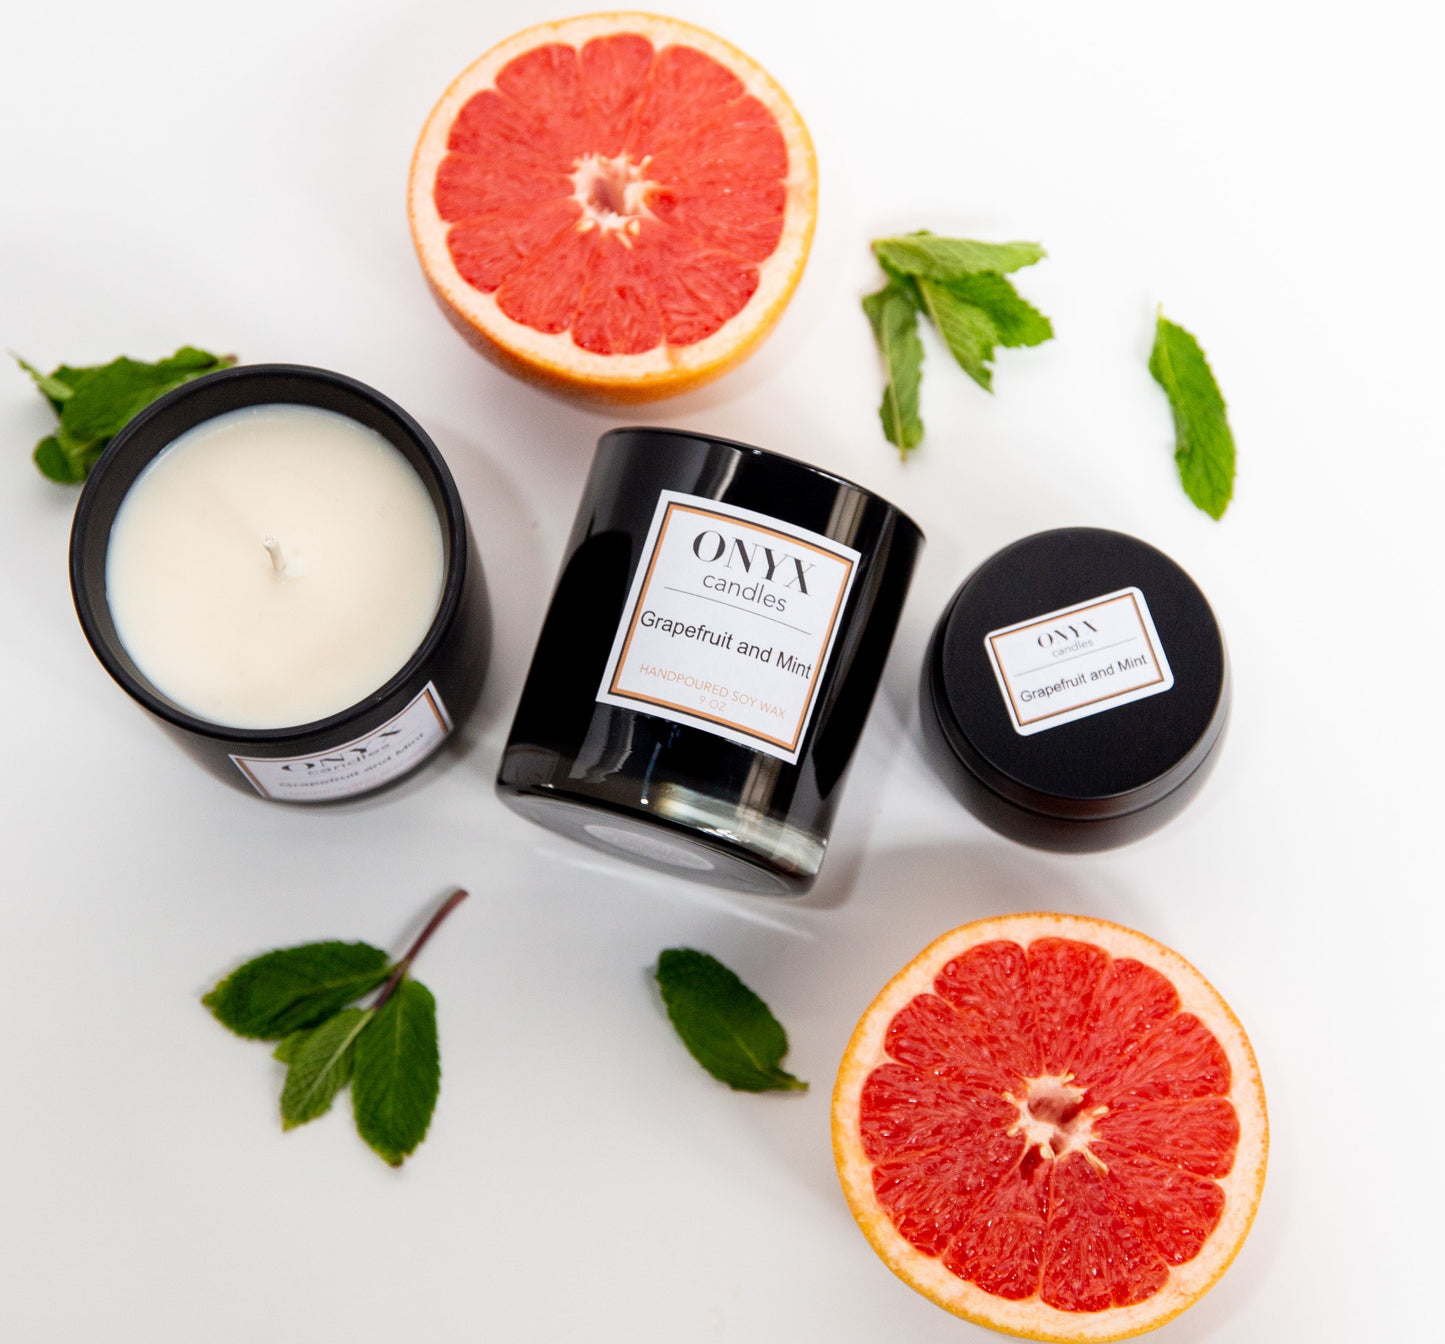 Grapefruit and Mint candle collection, shown with fresh grapefruits and mint leaves